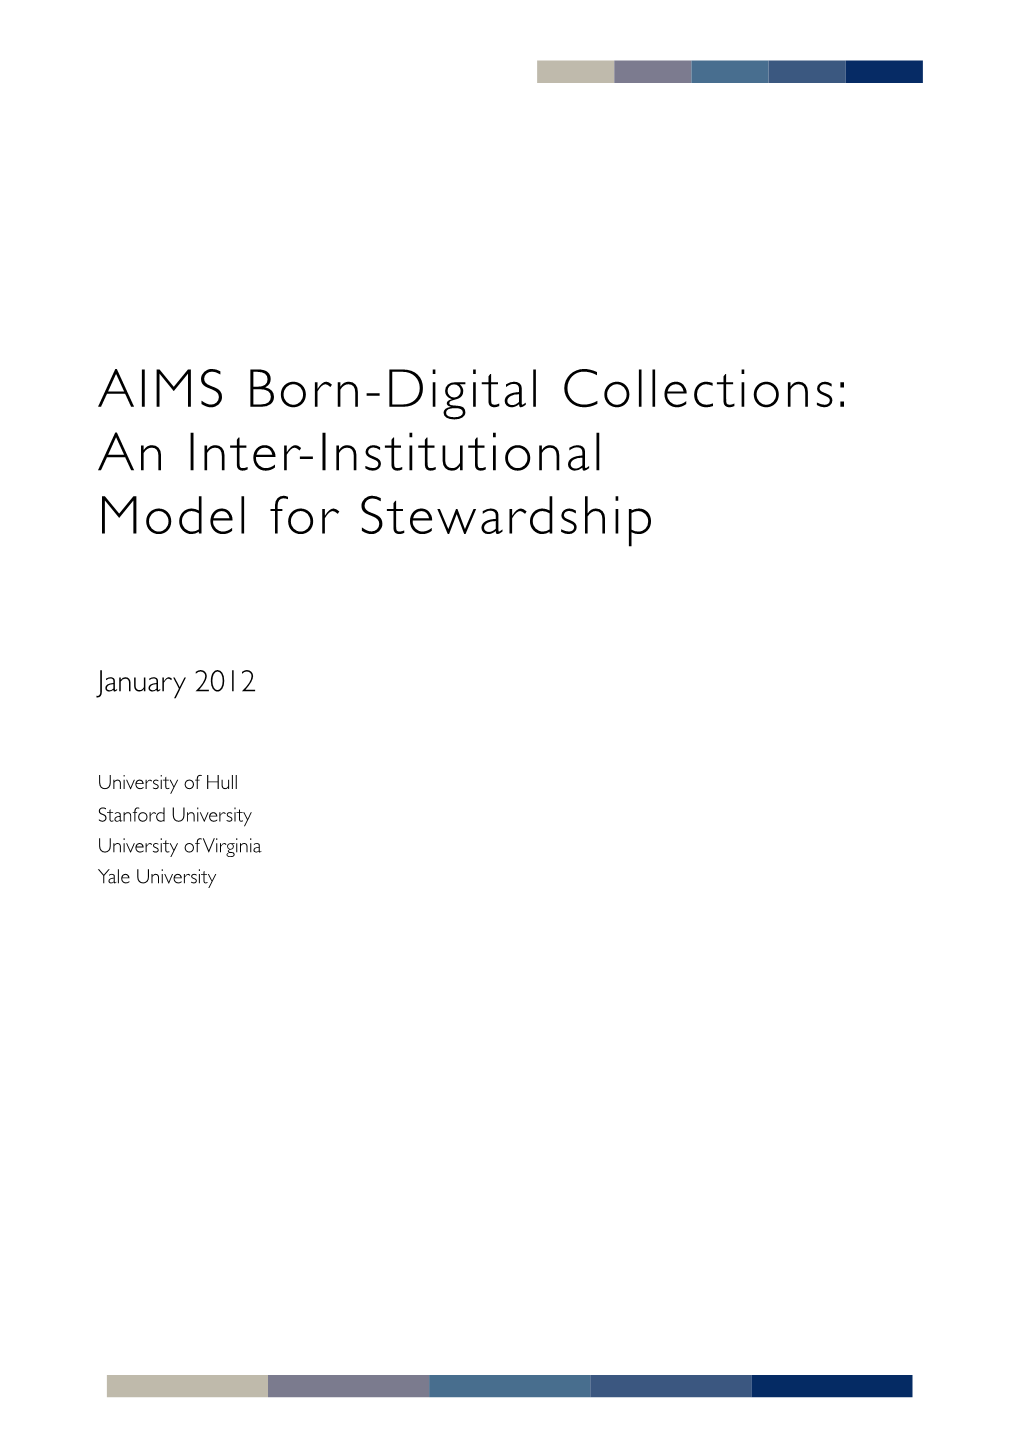 AIMS Born-Digital Collections: an Inter-Institutional Model for Stewardship